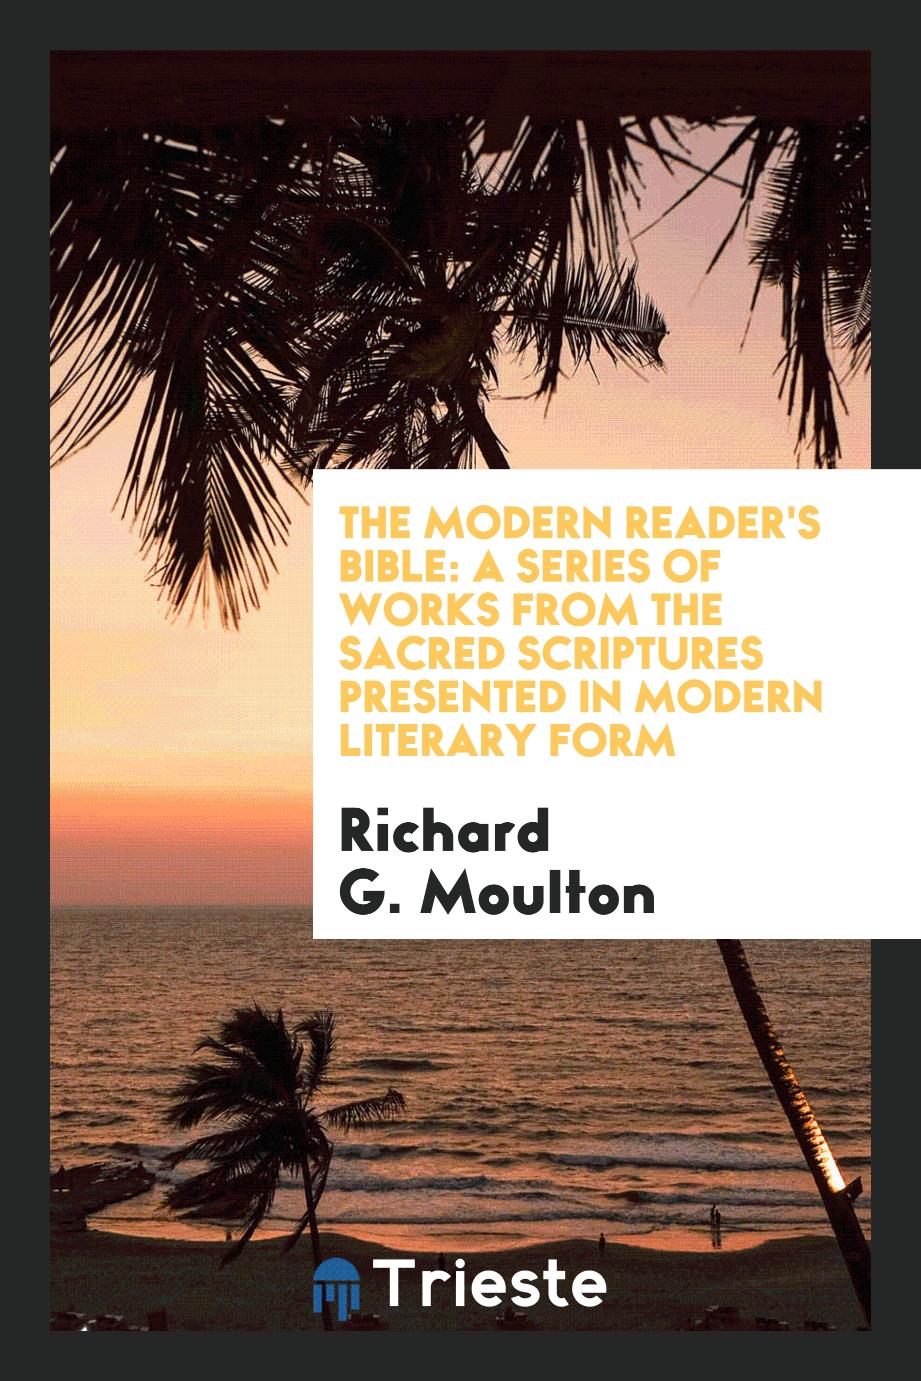 The modern reader's Bible: a series of works from the sacred Scriptures presented in modern literary form